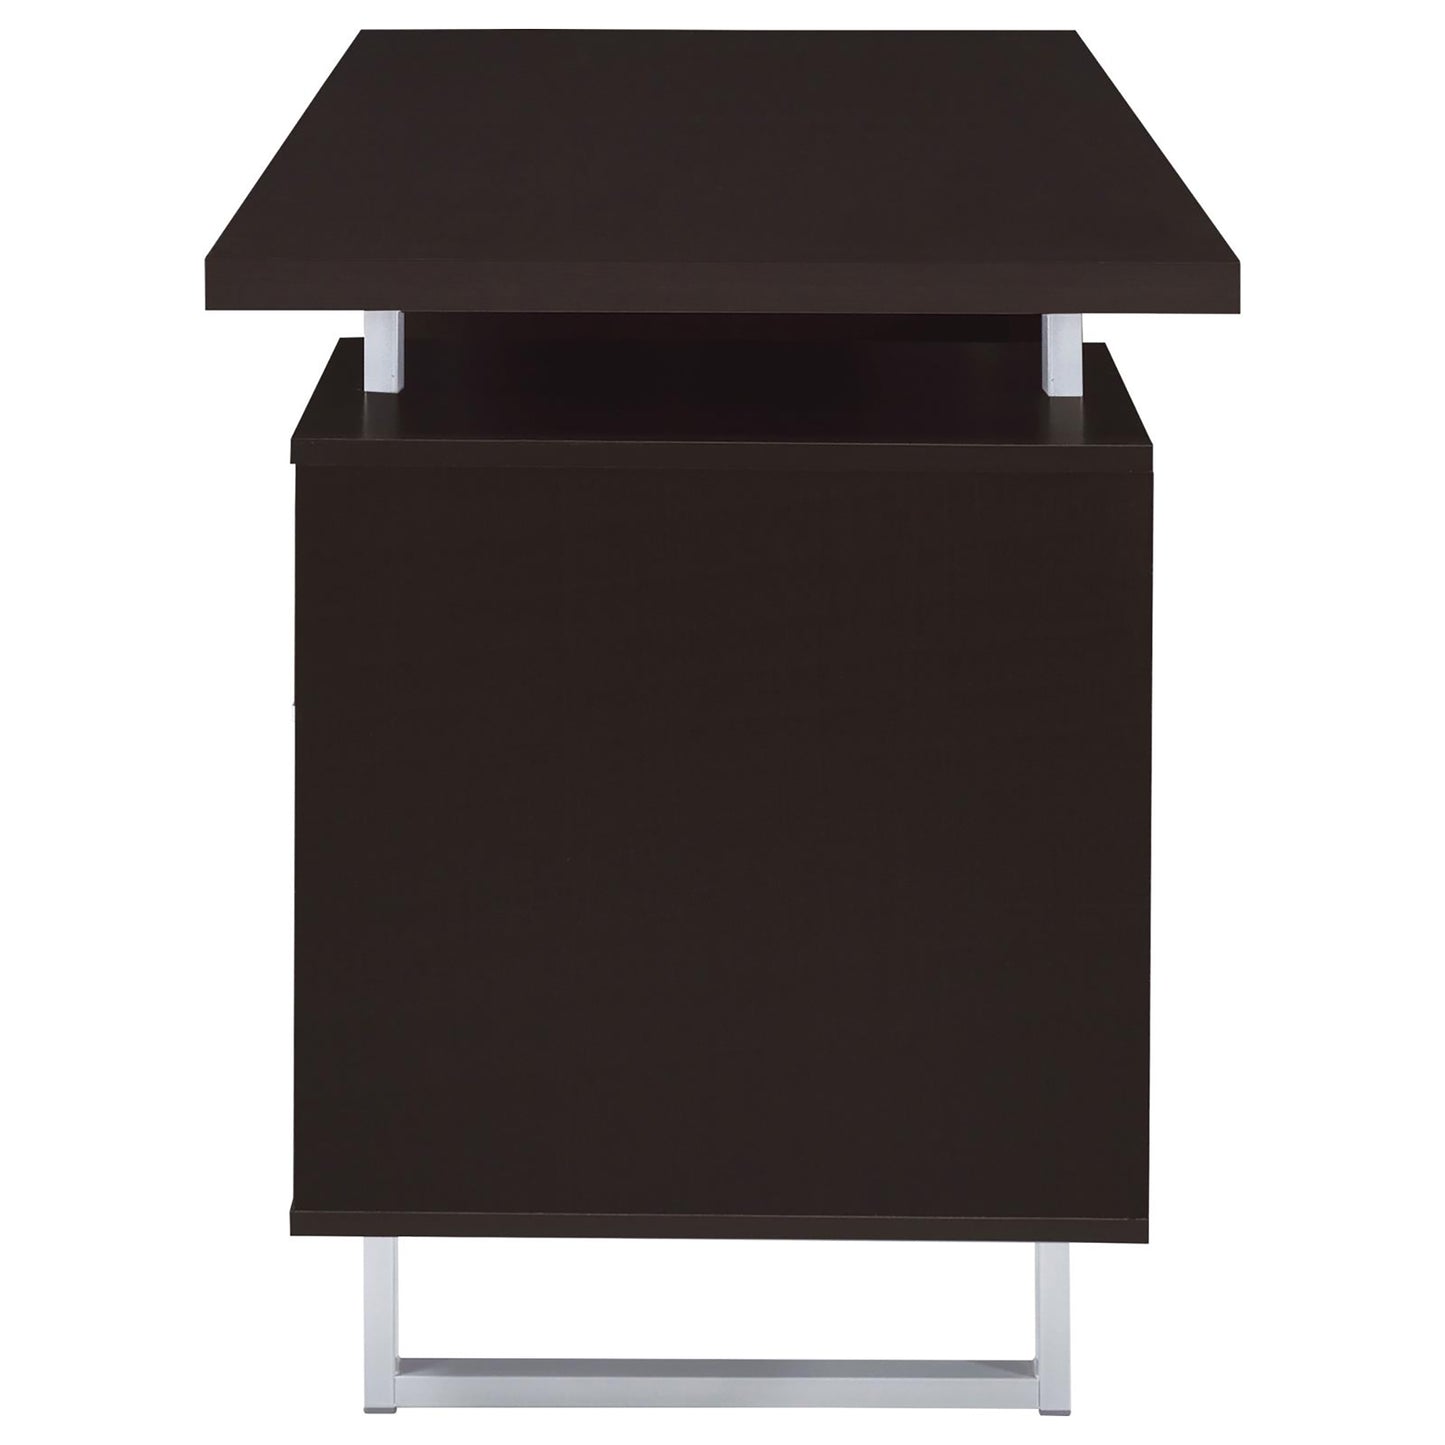 Tomar Cappuccino 2-drawer Floating Top Office Desk